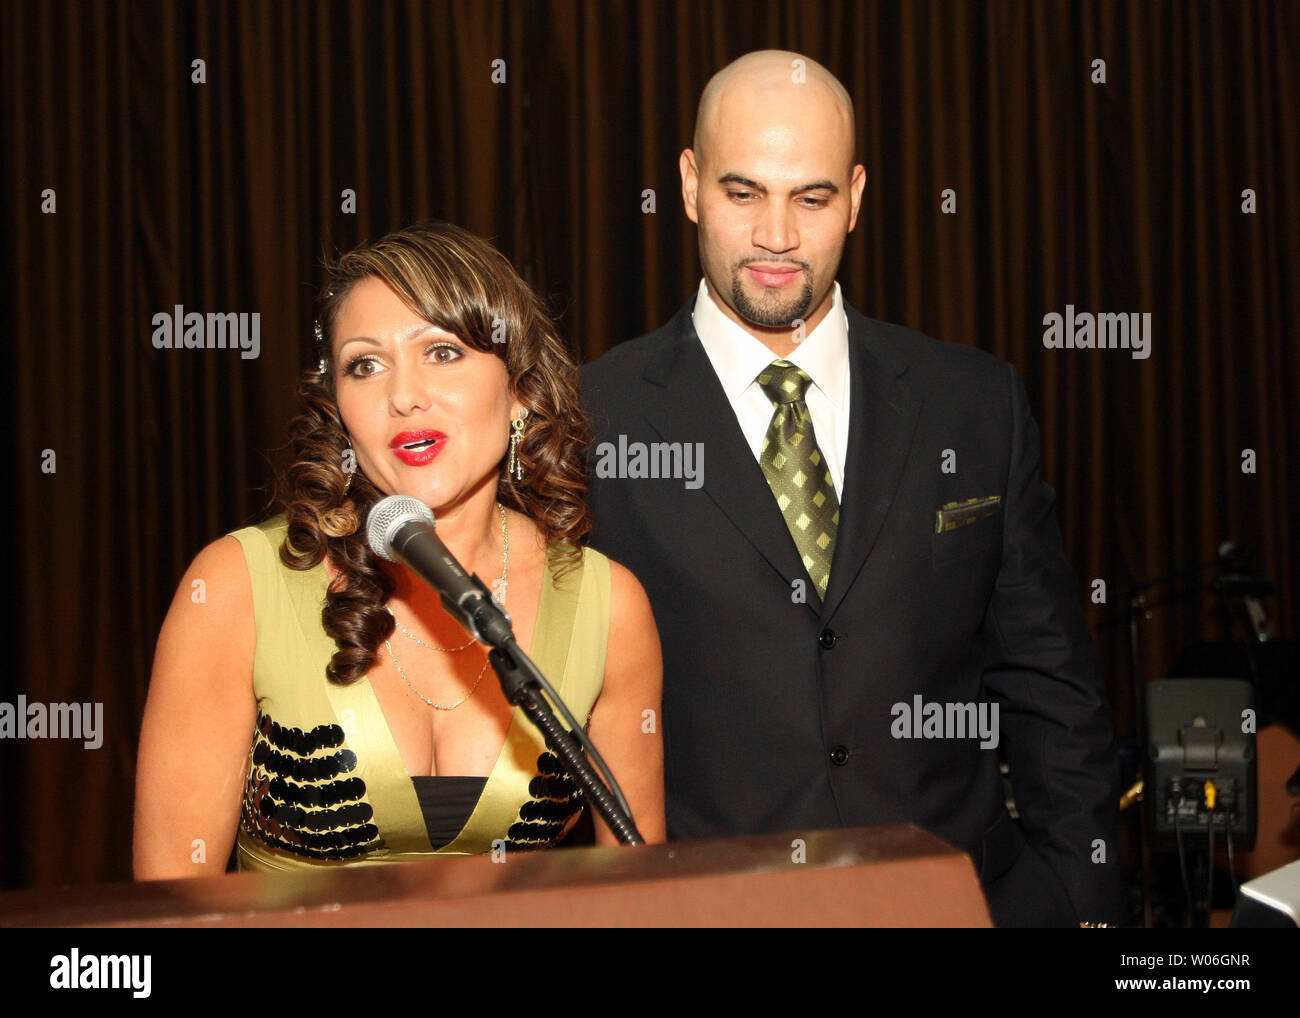 St. Louis Cardinals first baseman and the 2008 National League's Most  Valuable Player Albert Pujols listens as wife Deidre speaks to those  attending the Annual Pujols Family Foundation Holiday Party at the